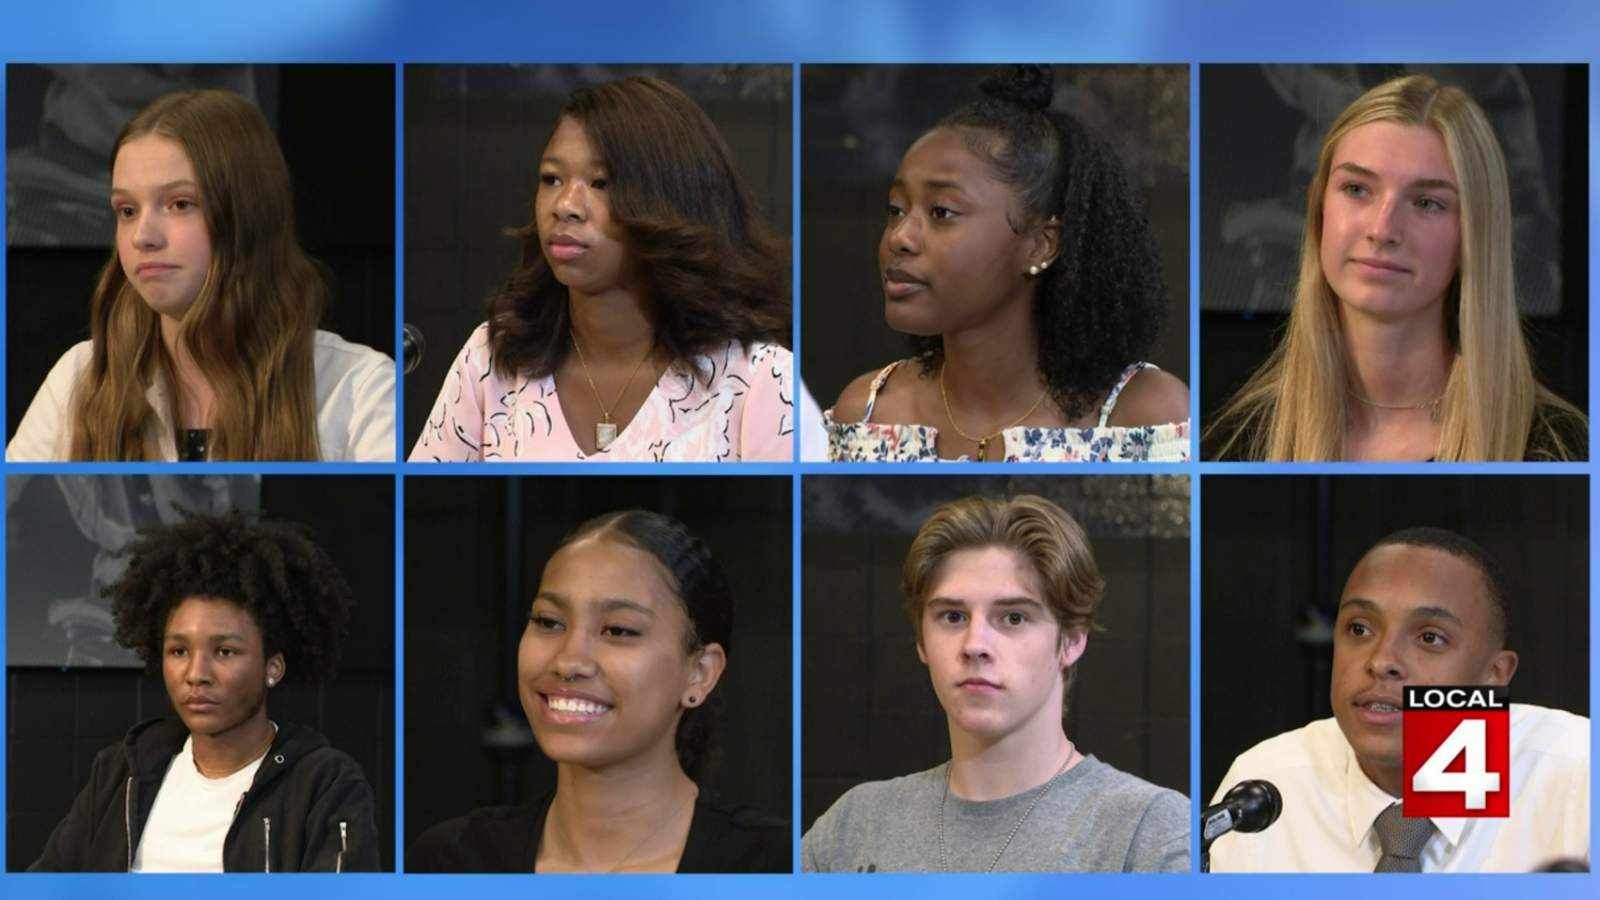 Students share their views on the racial equality movement